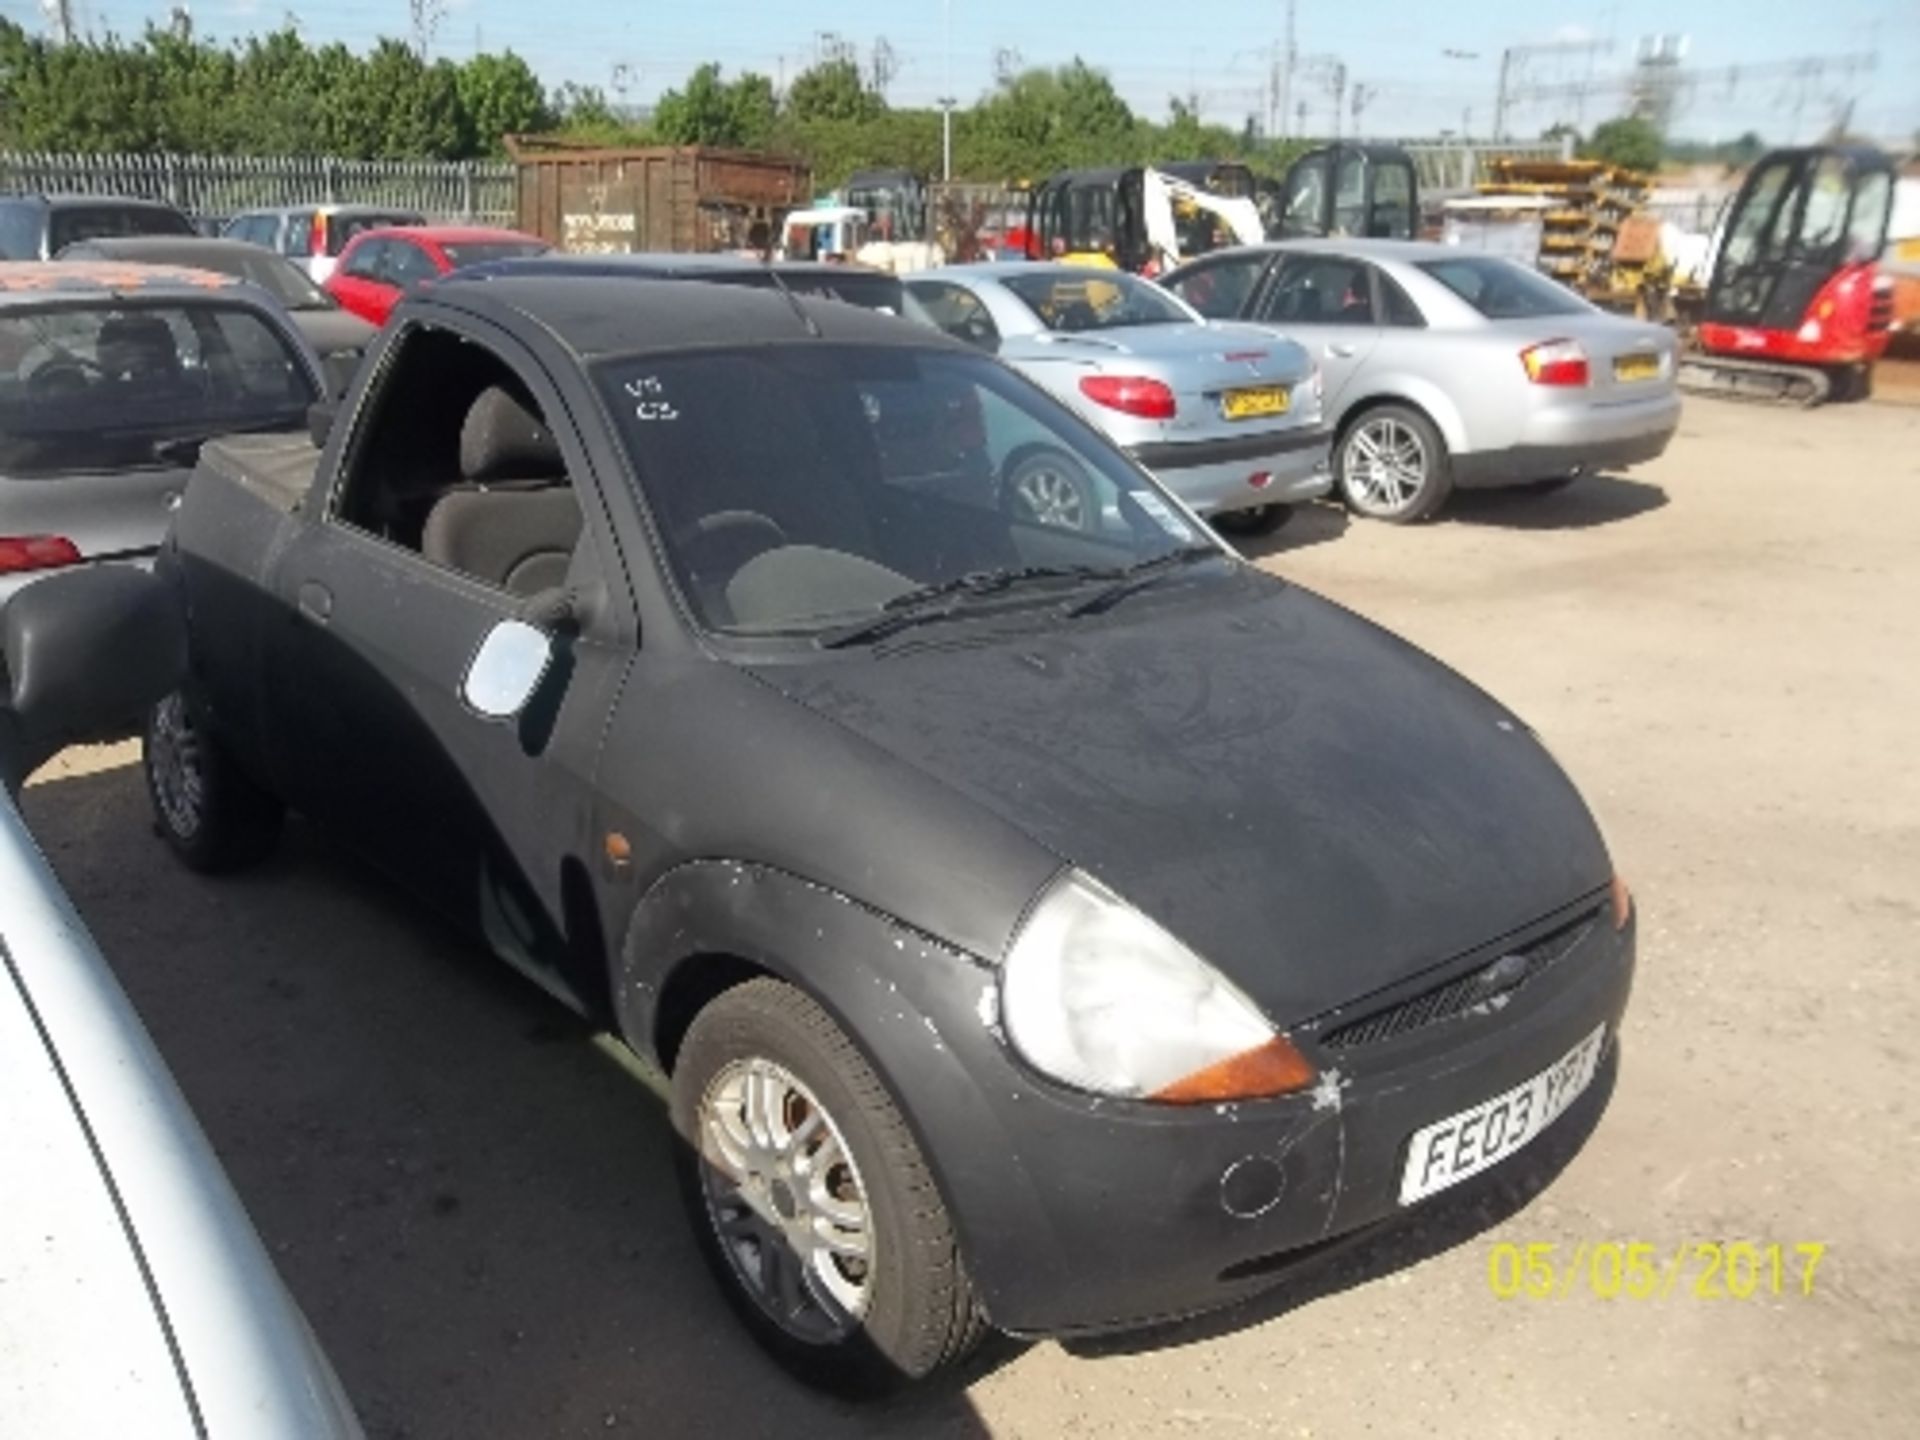 Ford KA Collection - FE03 YPT Date of registration: 19.03.2003 1299cc, petrol, manual, black - Image 3 of 5